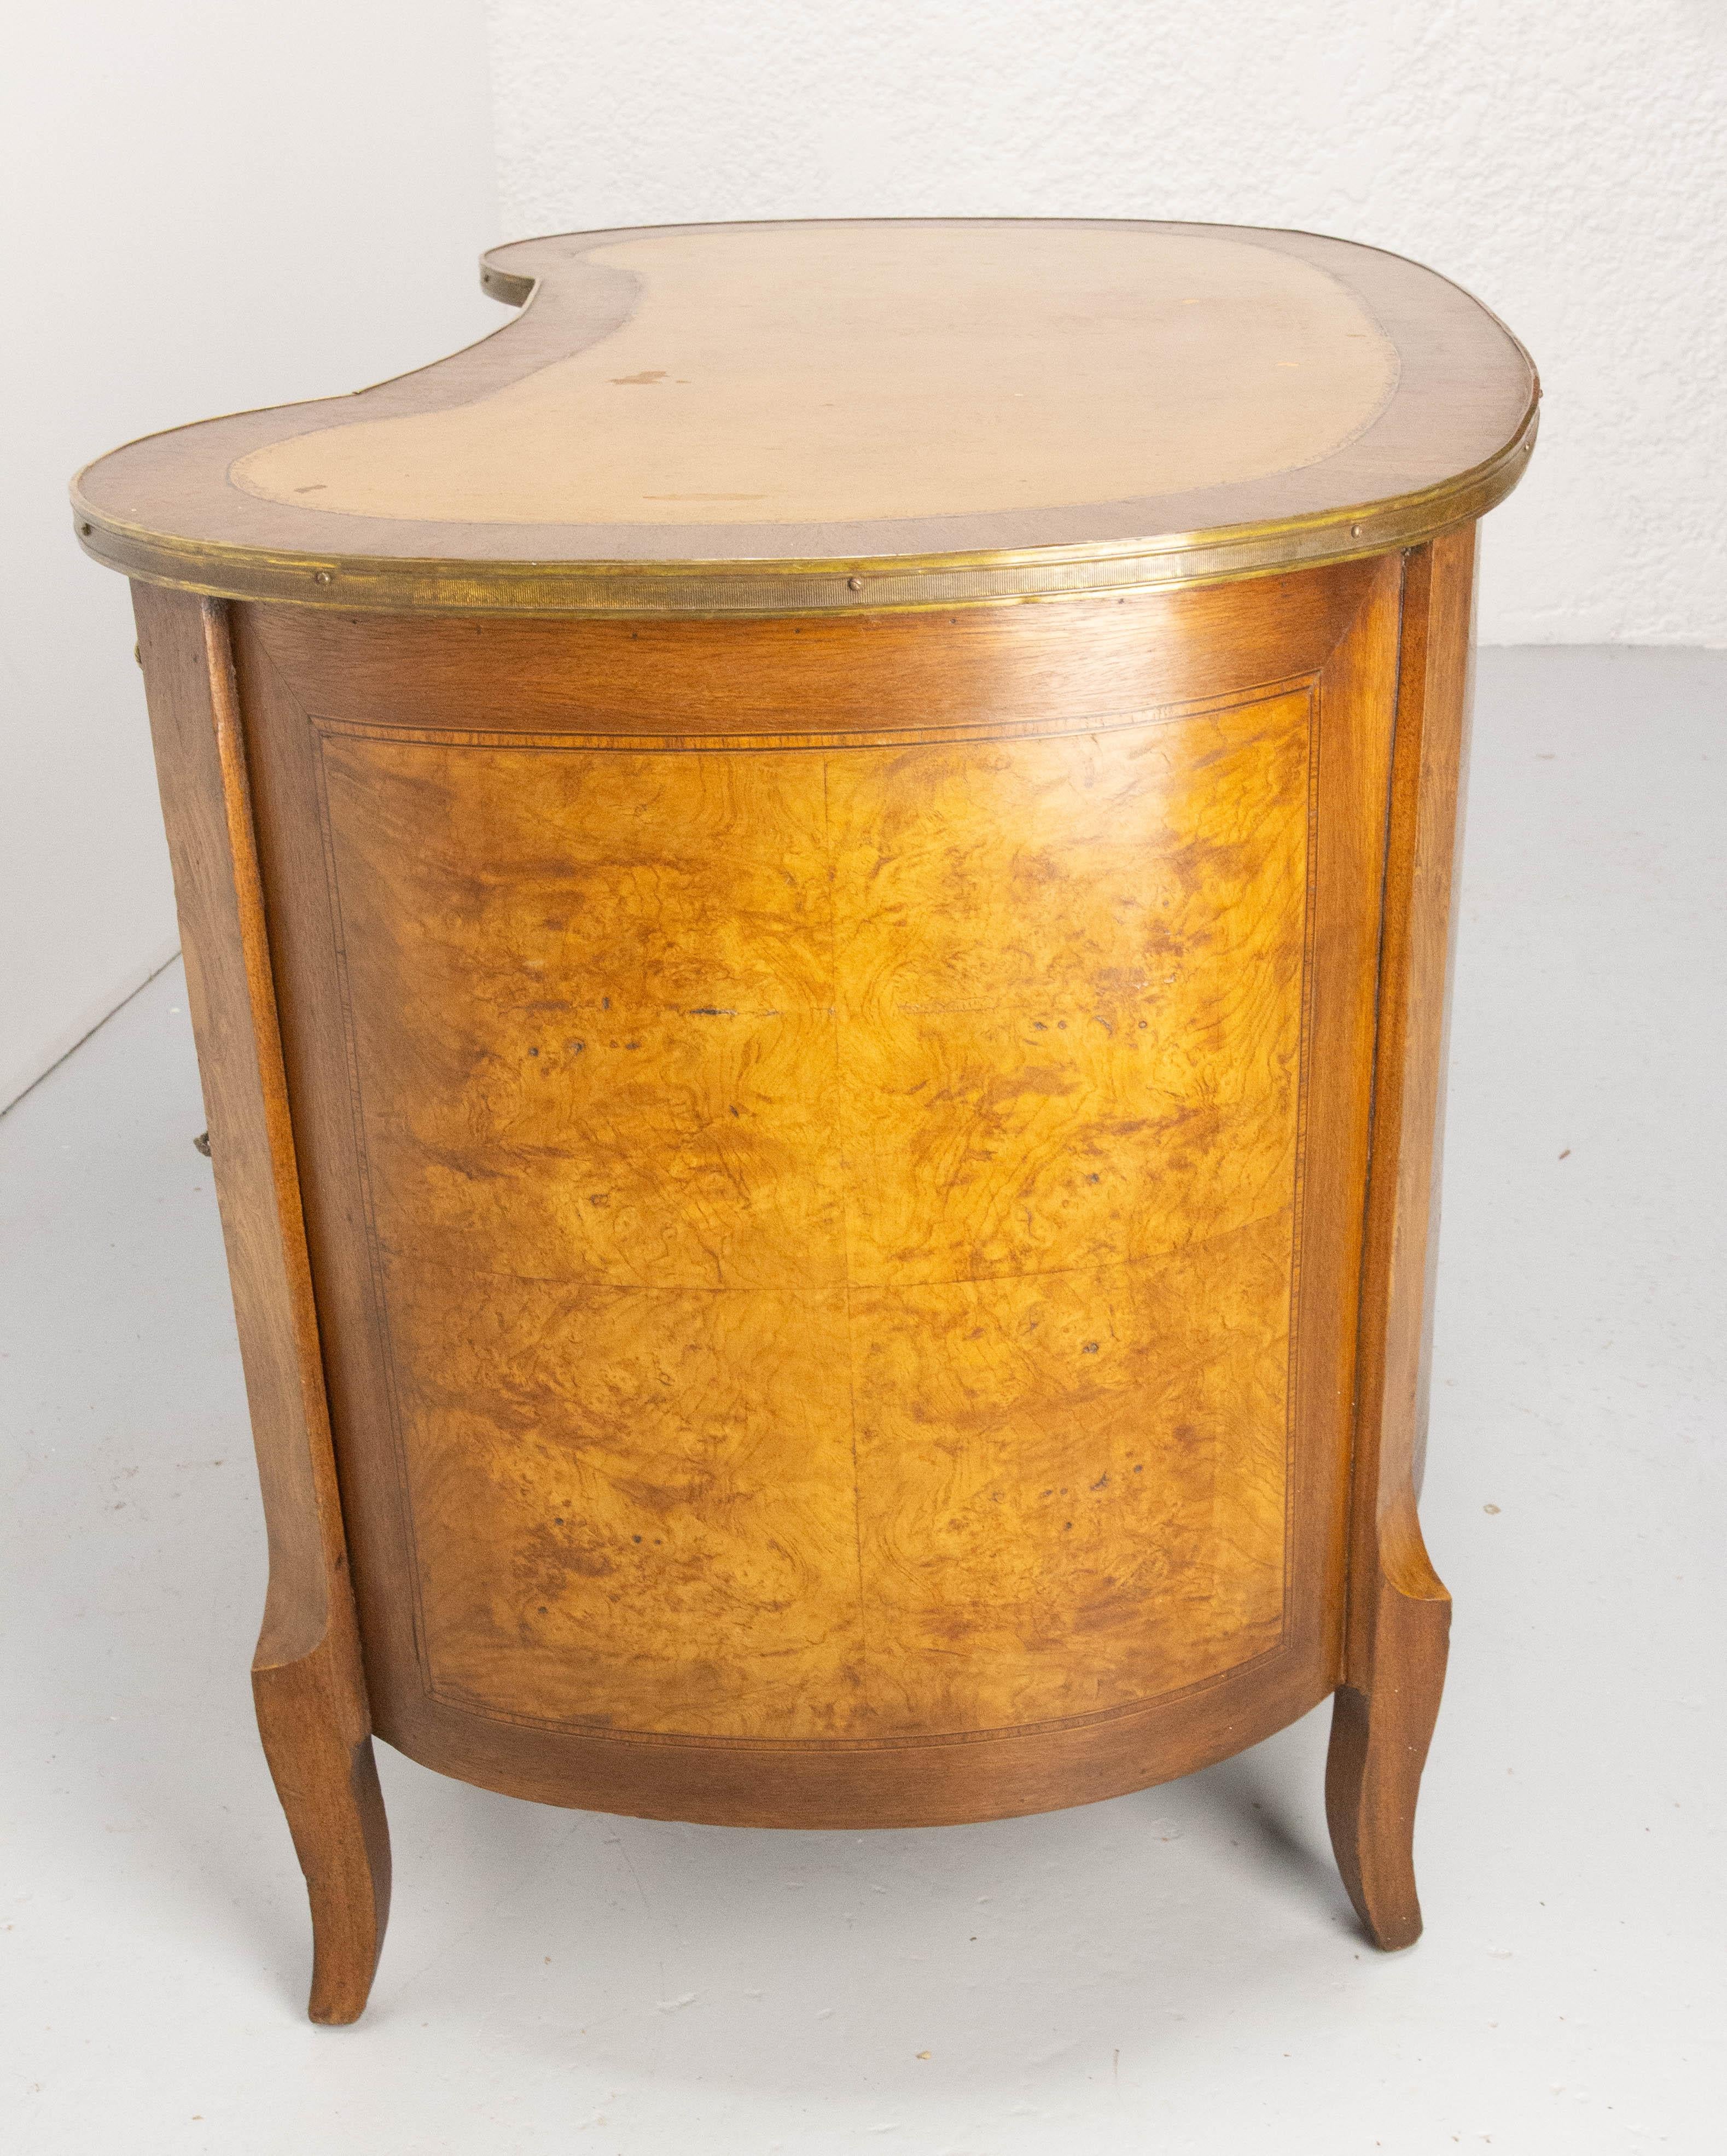 Mid-20th Century French Elm Burl Brass & Coated Fabric Desk Kidney Shape Louis XV Style c. 1960 For Sale